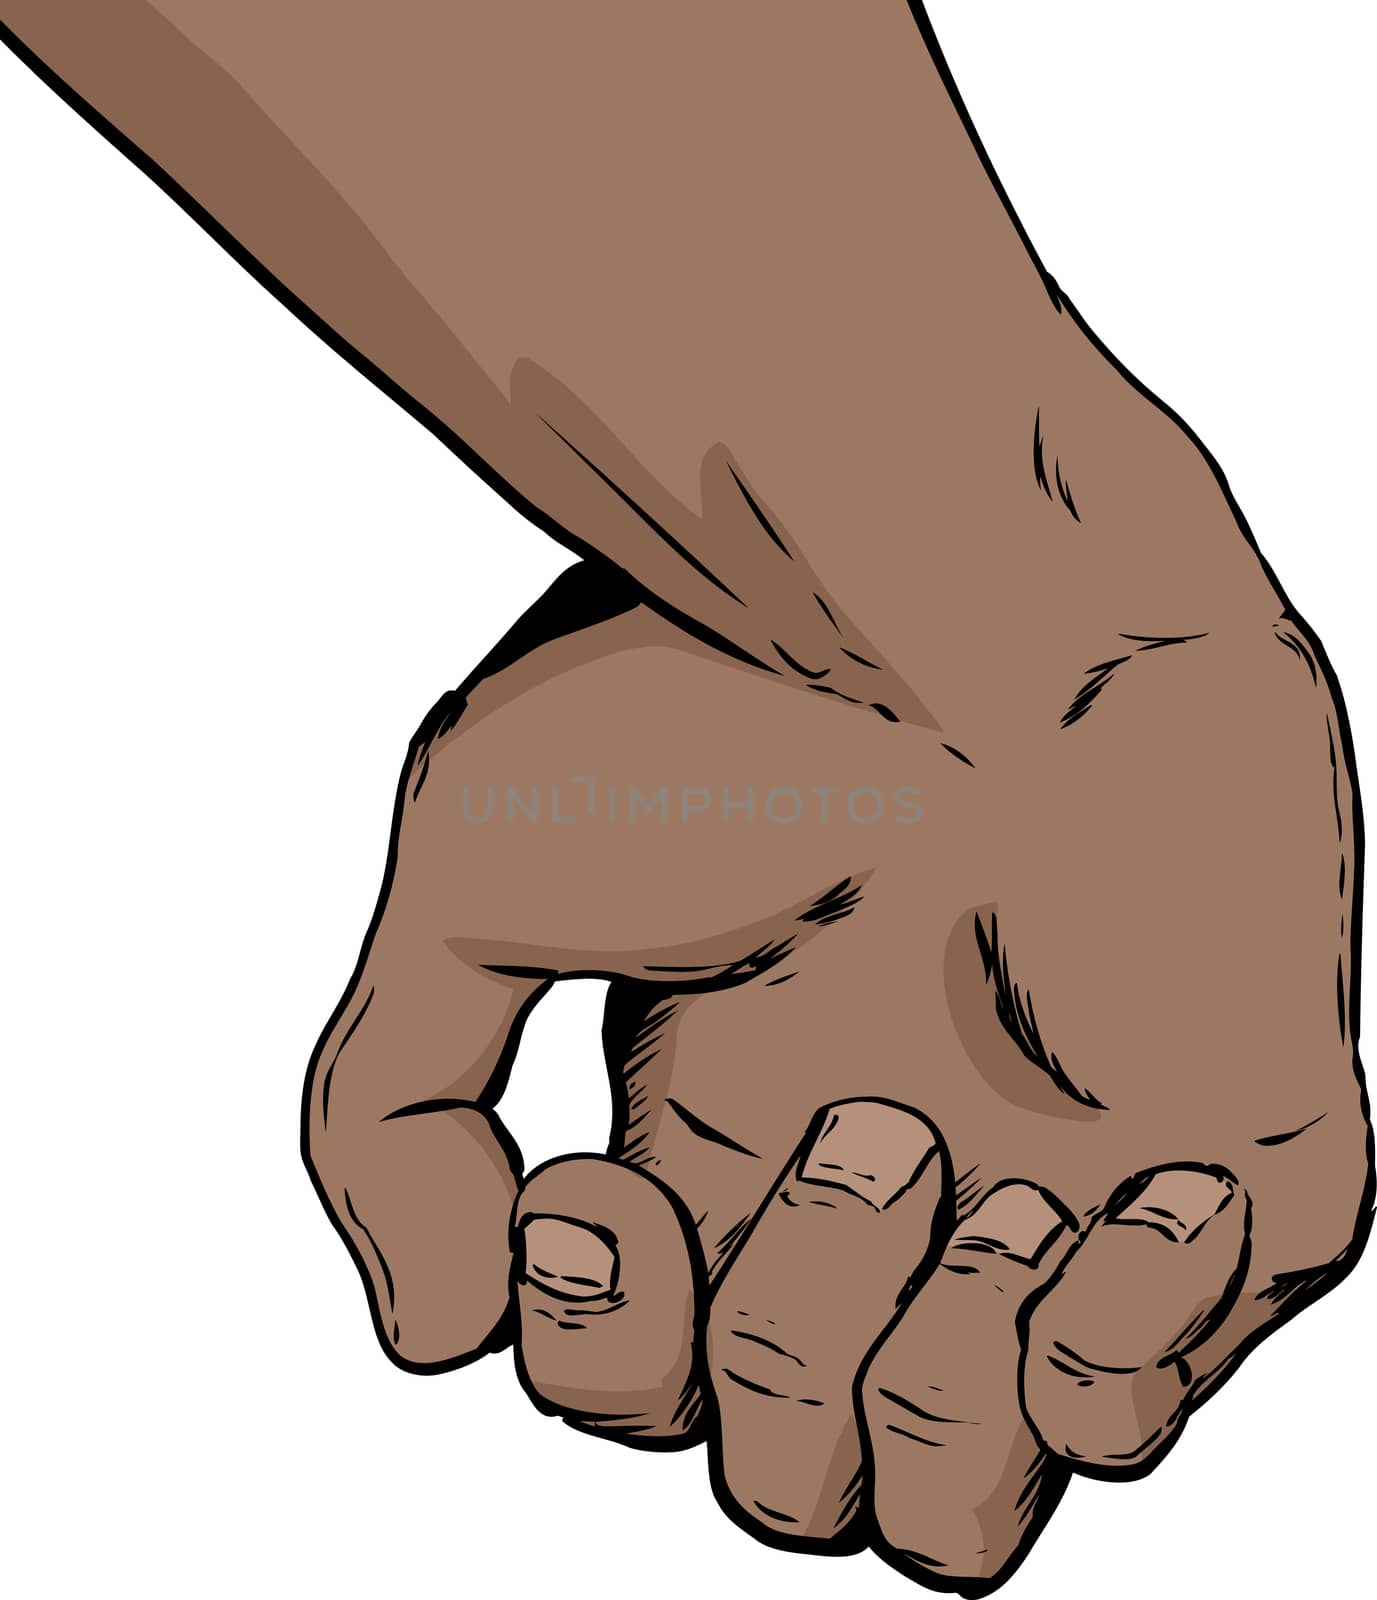 Illustration of inside of partially open human hand holding something over white background